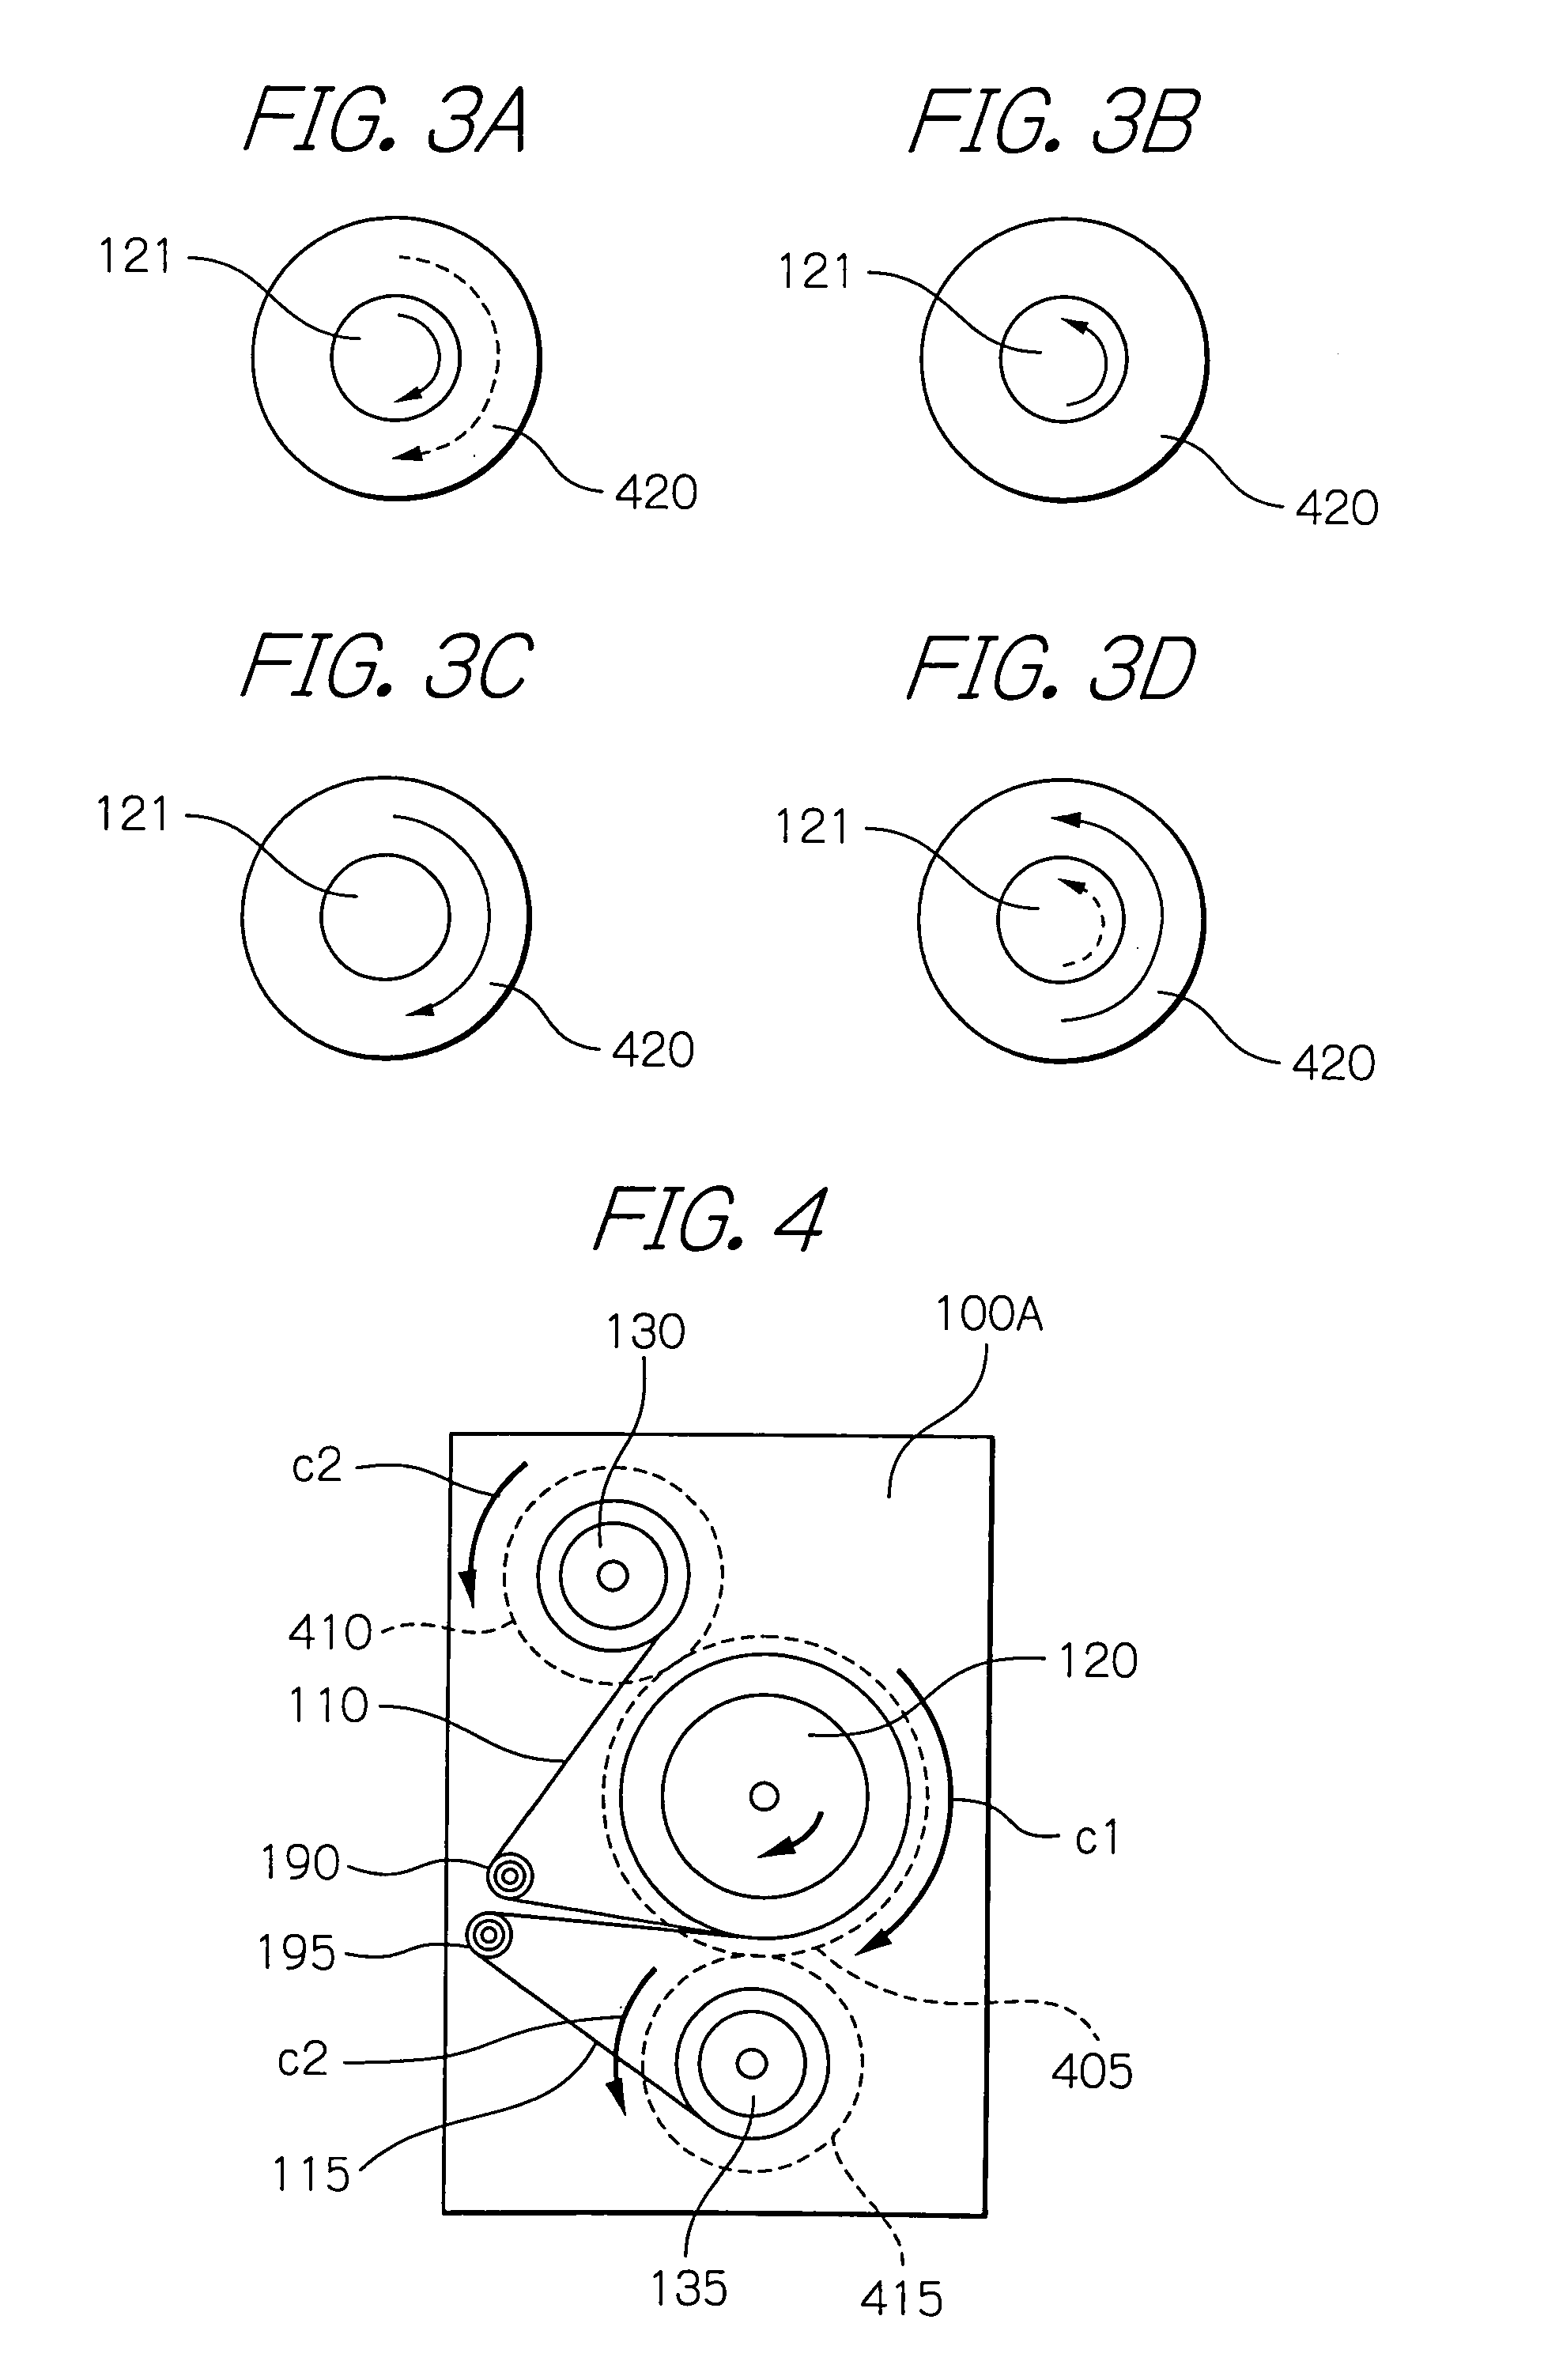 Media storing and feeding device with maximum angular speed of reels reduced